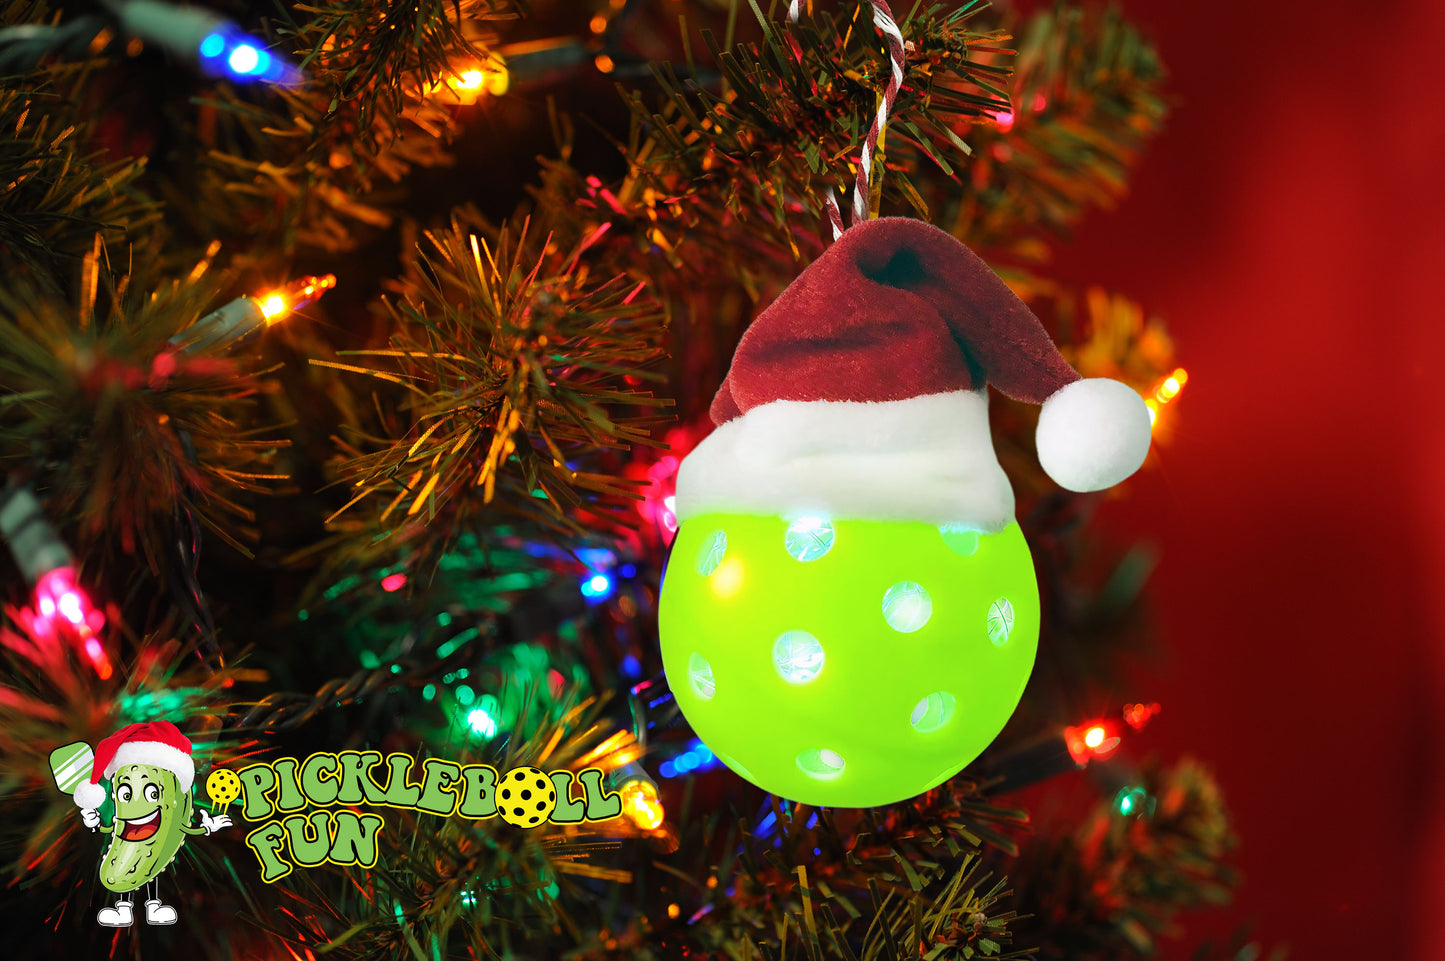 Pickleball Light Up Holiday Ornaments 3-Pack